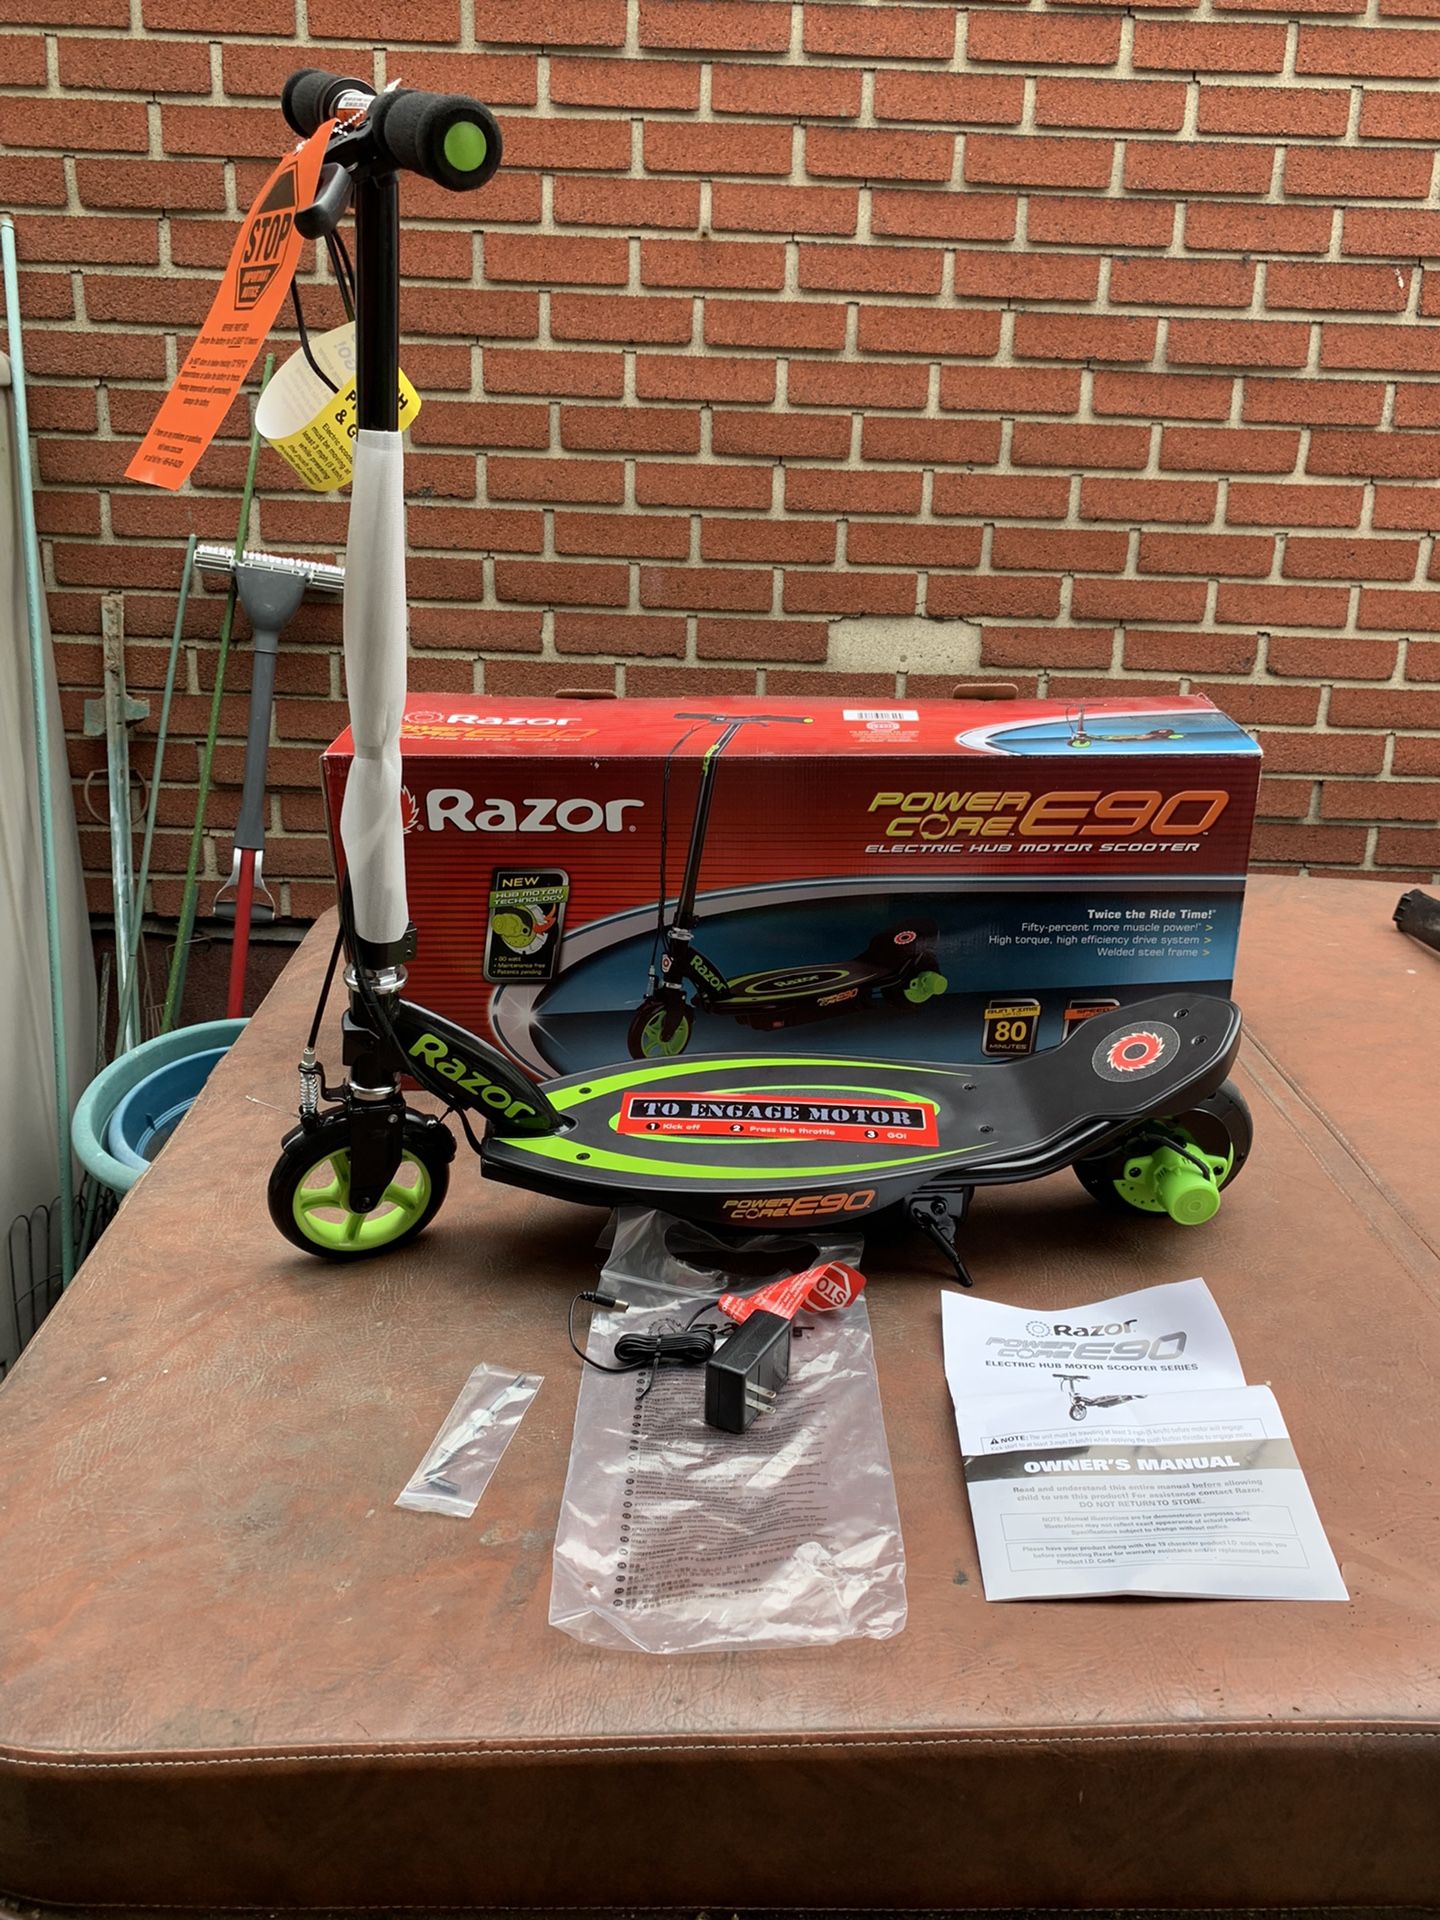 Razor Power Core E90 Electric Scooter - Hub Motor, Up to 10 mph and 80 min Ride Time, for Kids 8 and Up New in Box Innovative Power Core technology fe